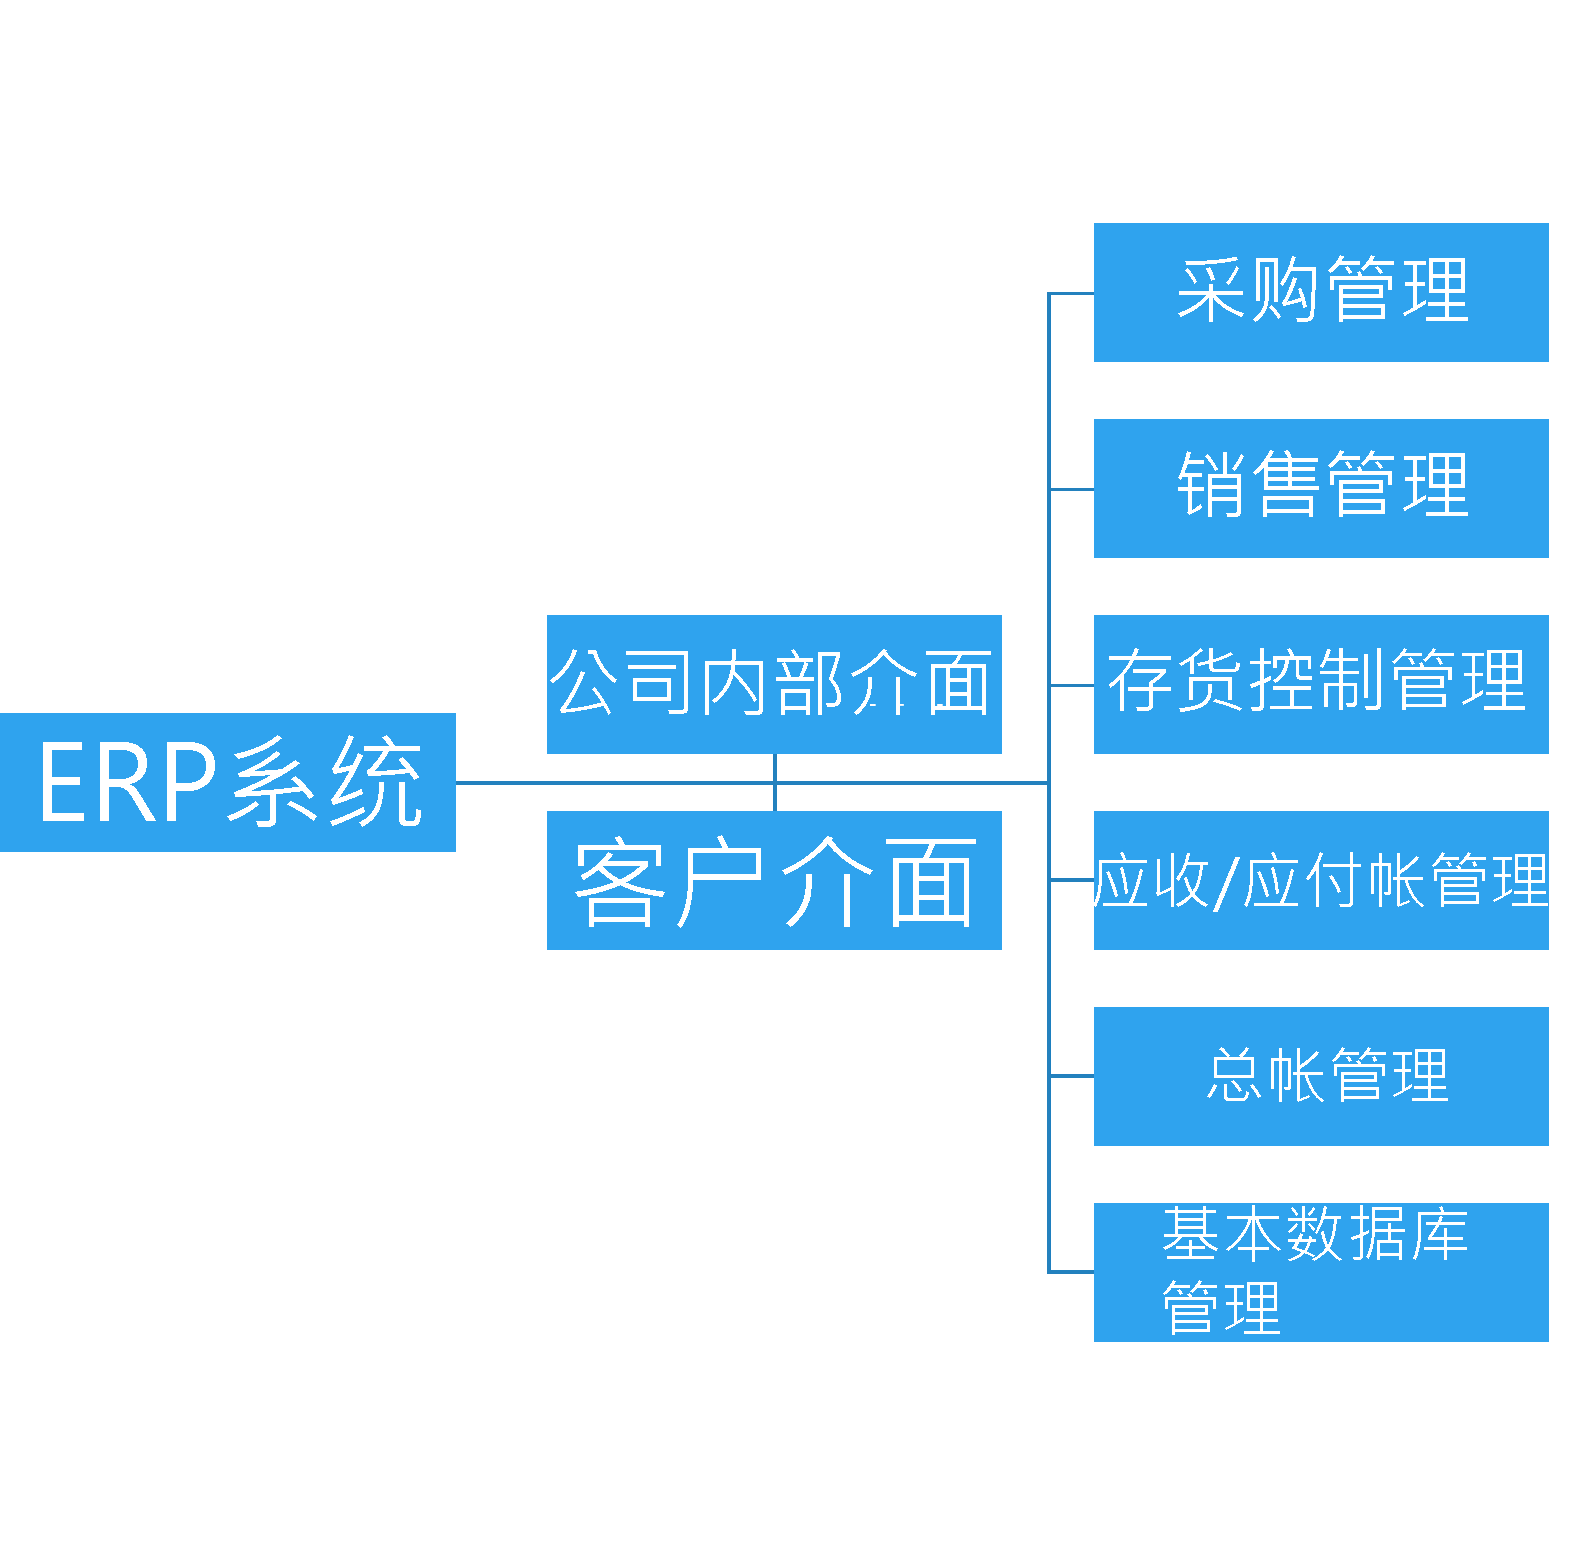 ERP system function